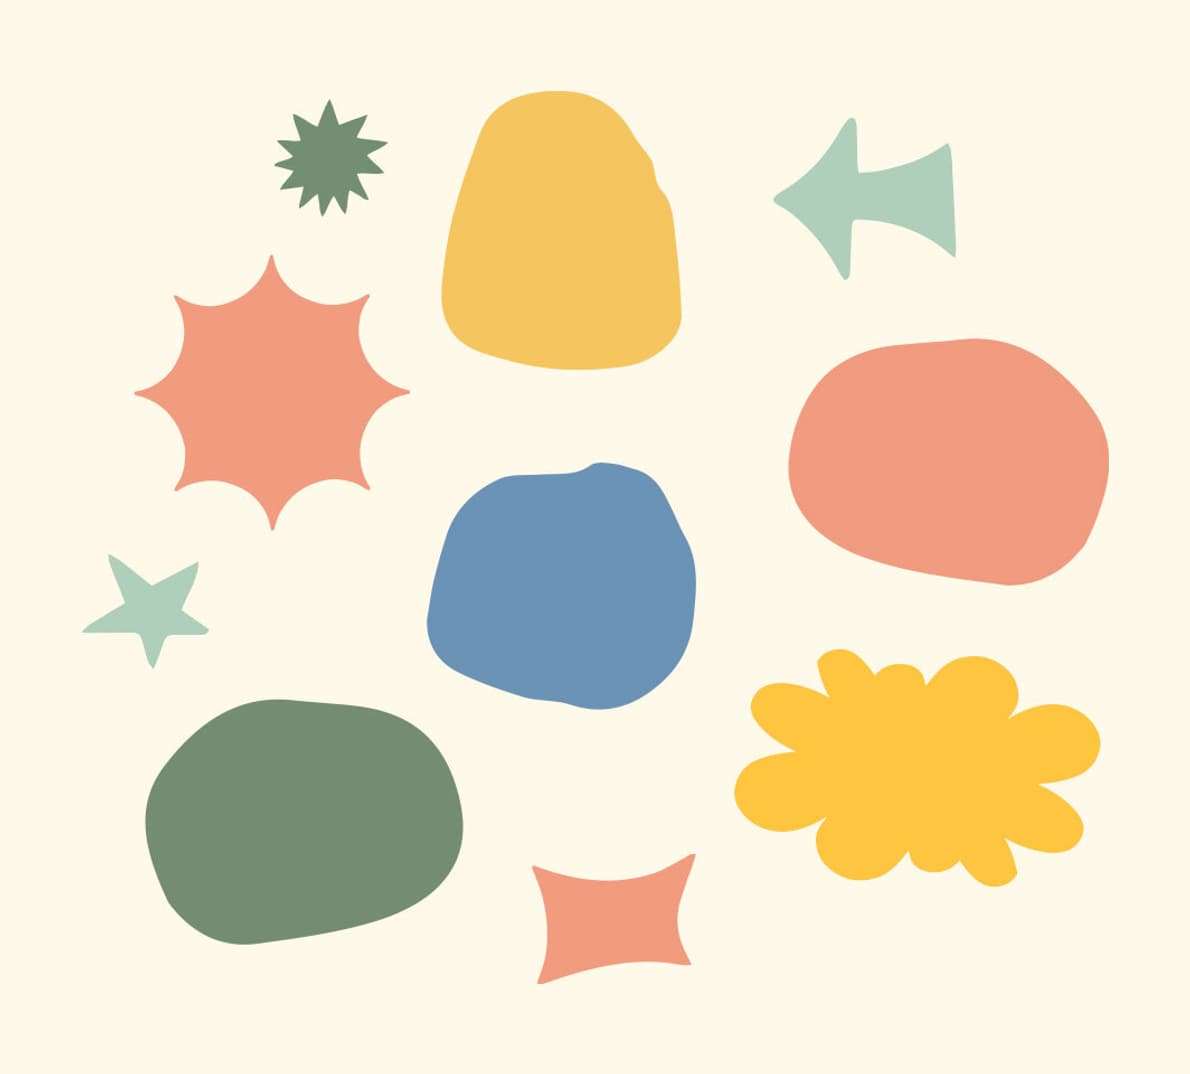 Miscellaneous colored illustration shapes are grouped together.